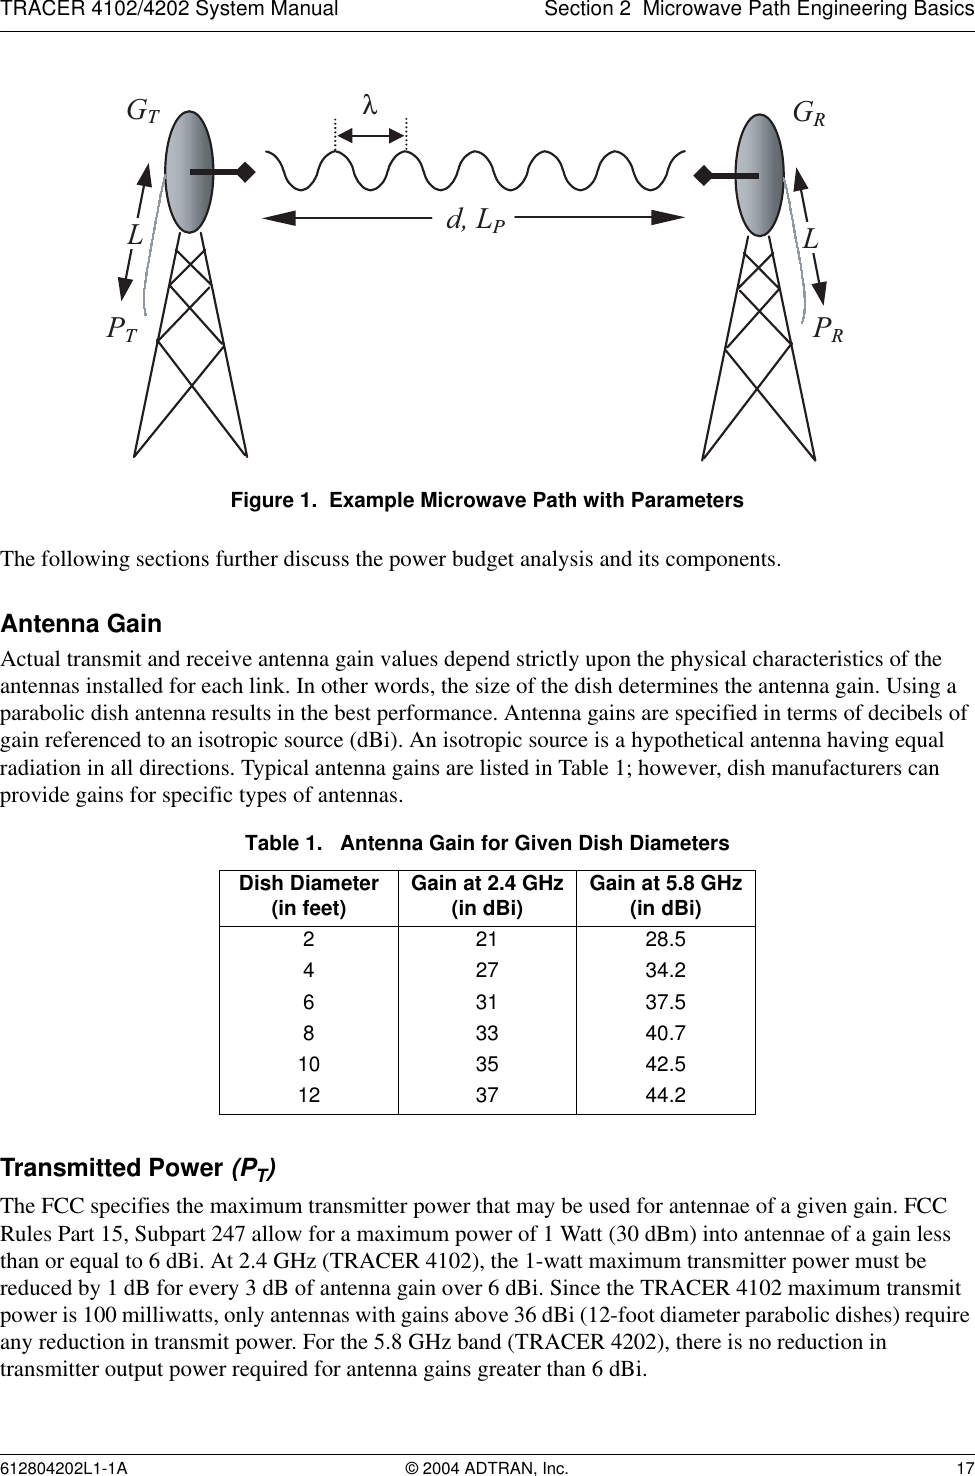 TRACER 4102/4202 System Manual Section 2  Microwave Path Engineering Basics612804202L1-1A © 2004 ADTRAN, Inc. 17Figure 1.  Example Microwave Path with ParametersThe following sections further discuss the power budget analysis and its components.Antenna GainActual transmit and receive antenna gain values depend strictly upon the physical characteristics of the antennas installed for each link. In other words, the size of the dish determines the antenna gain. Using a parabolic dish antenna results in the best performance. Antenna gains are specified in terms of decibels of gain referenced to an isotropic source (dBi). An isotropic source is a hypothetical antenna having equal radiation in all directions. Typical antenna gains are listed in Table 1; however, dish manufacturers can provide gains for specific types of antennas.Transmitted Power (PT)The FCC specifies the maximum transmitter power that may be used for antennae of a given gain. FCC Rules Part 15, Subpart 247 allow for a maximum power of 1 Watt (30 dBm) into antennae of a gain less than or equal to 6 dBi. At 2.4 GHz (TRACER 4102), the 1-watt maximum transmitter power must be reduced by 1 dB for every 3 dB of antenna gain over 6 dBi. Since the TRACER 4102 maximum transmit power is 100 milliwatts, only antennas with gains above 36 dBi (12-foot diameter parabolic dishes) require any reduction in transmit power. For the 5.8 GHz band (TRACER 4202), there is no reduction in transmitter output power required for antenna gains greater than 6 dBi.Table 1.   Antenna Gain for Given Dish DiametersDish Diameter(in feet) Gain at 2.4 GHz(in dBi) Gain at 5.8 GHz(in dBi)2 21 28.54 27 34.26 31 37.58 33 40.710 35 42.512 37 44.2 GTGRd, LPPTPRλLL